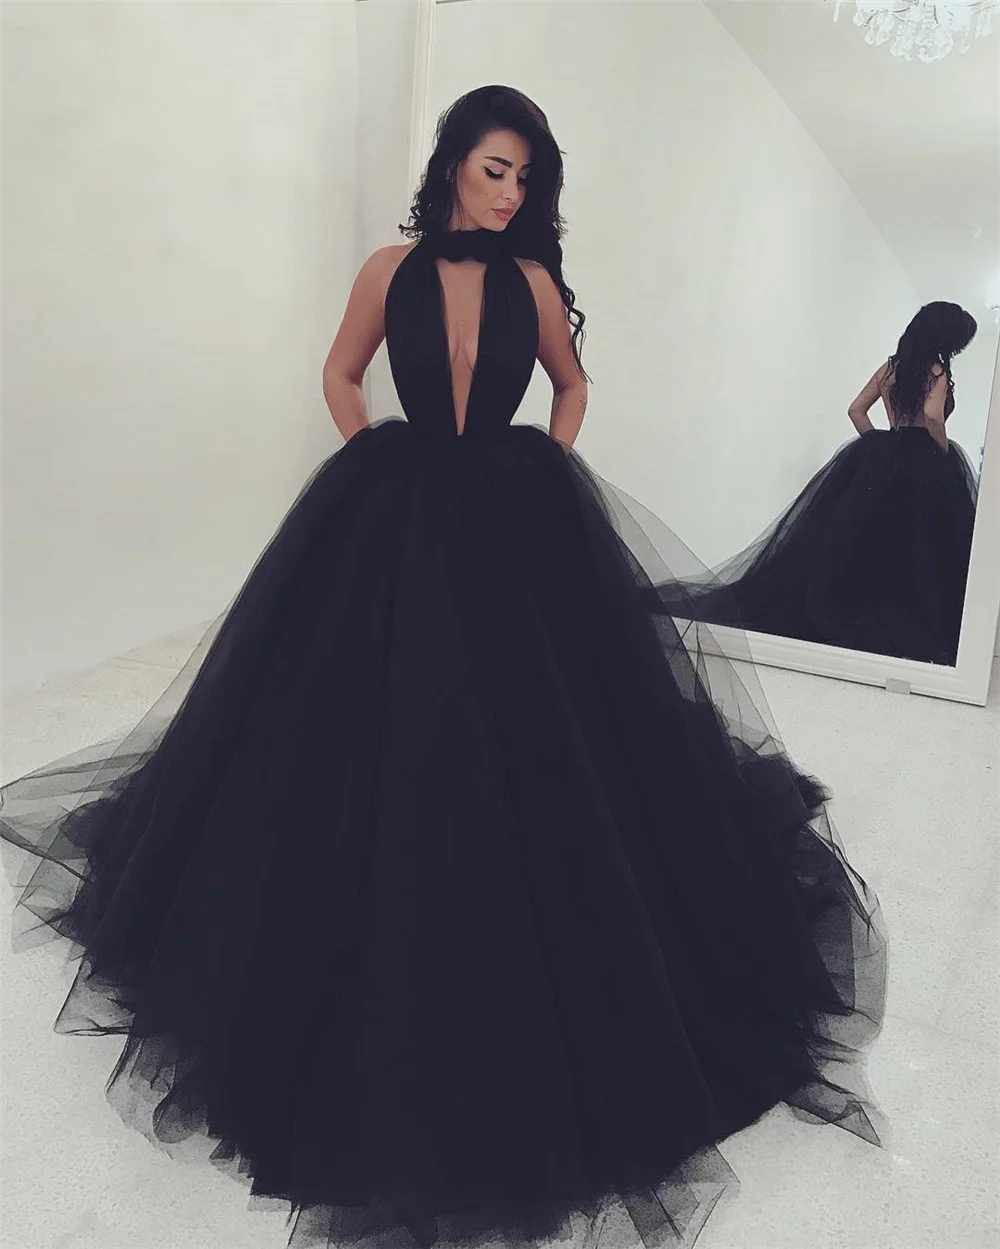 Black Tulle Princess Evening Dress Halter Backless Floor Length Sexy Prom Party Gowns 2020 High Quality Arabic Women Dresses